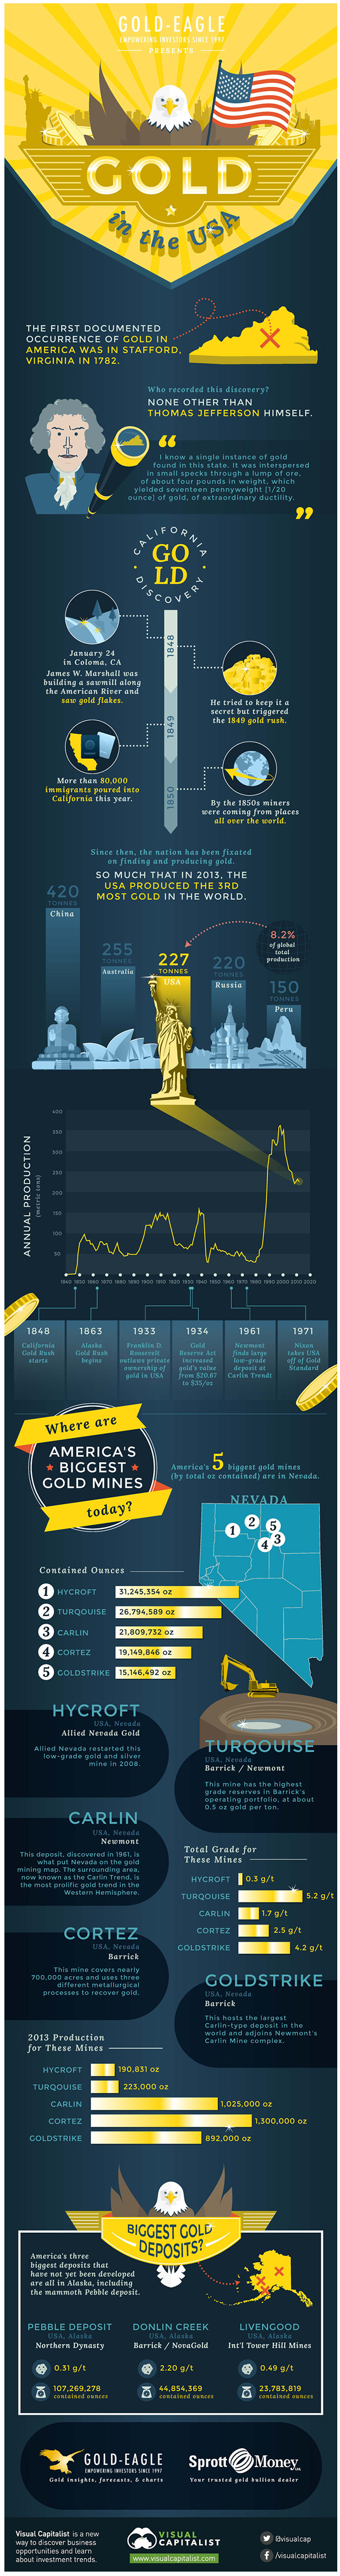 INFOGRAPHIC: Gold history and mining in the USA